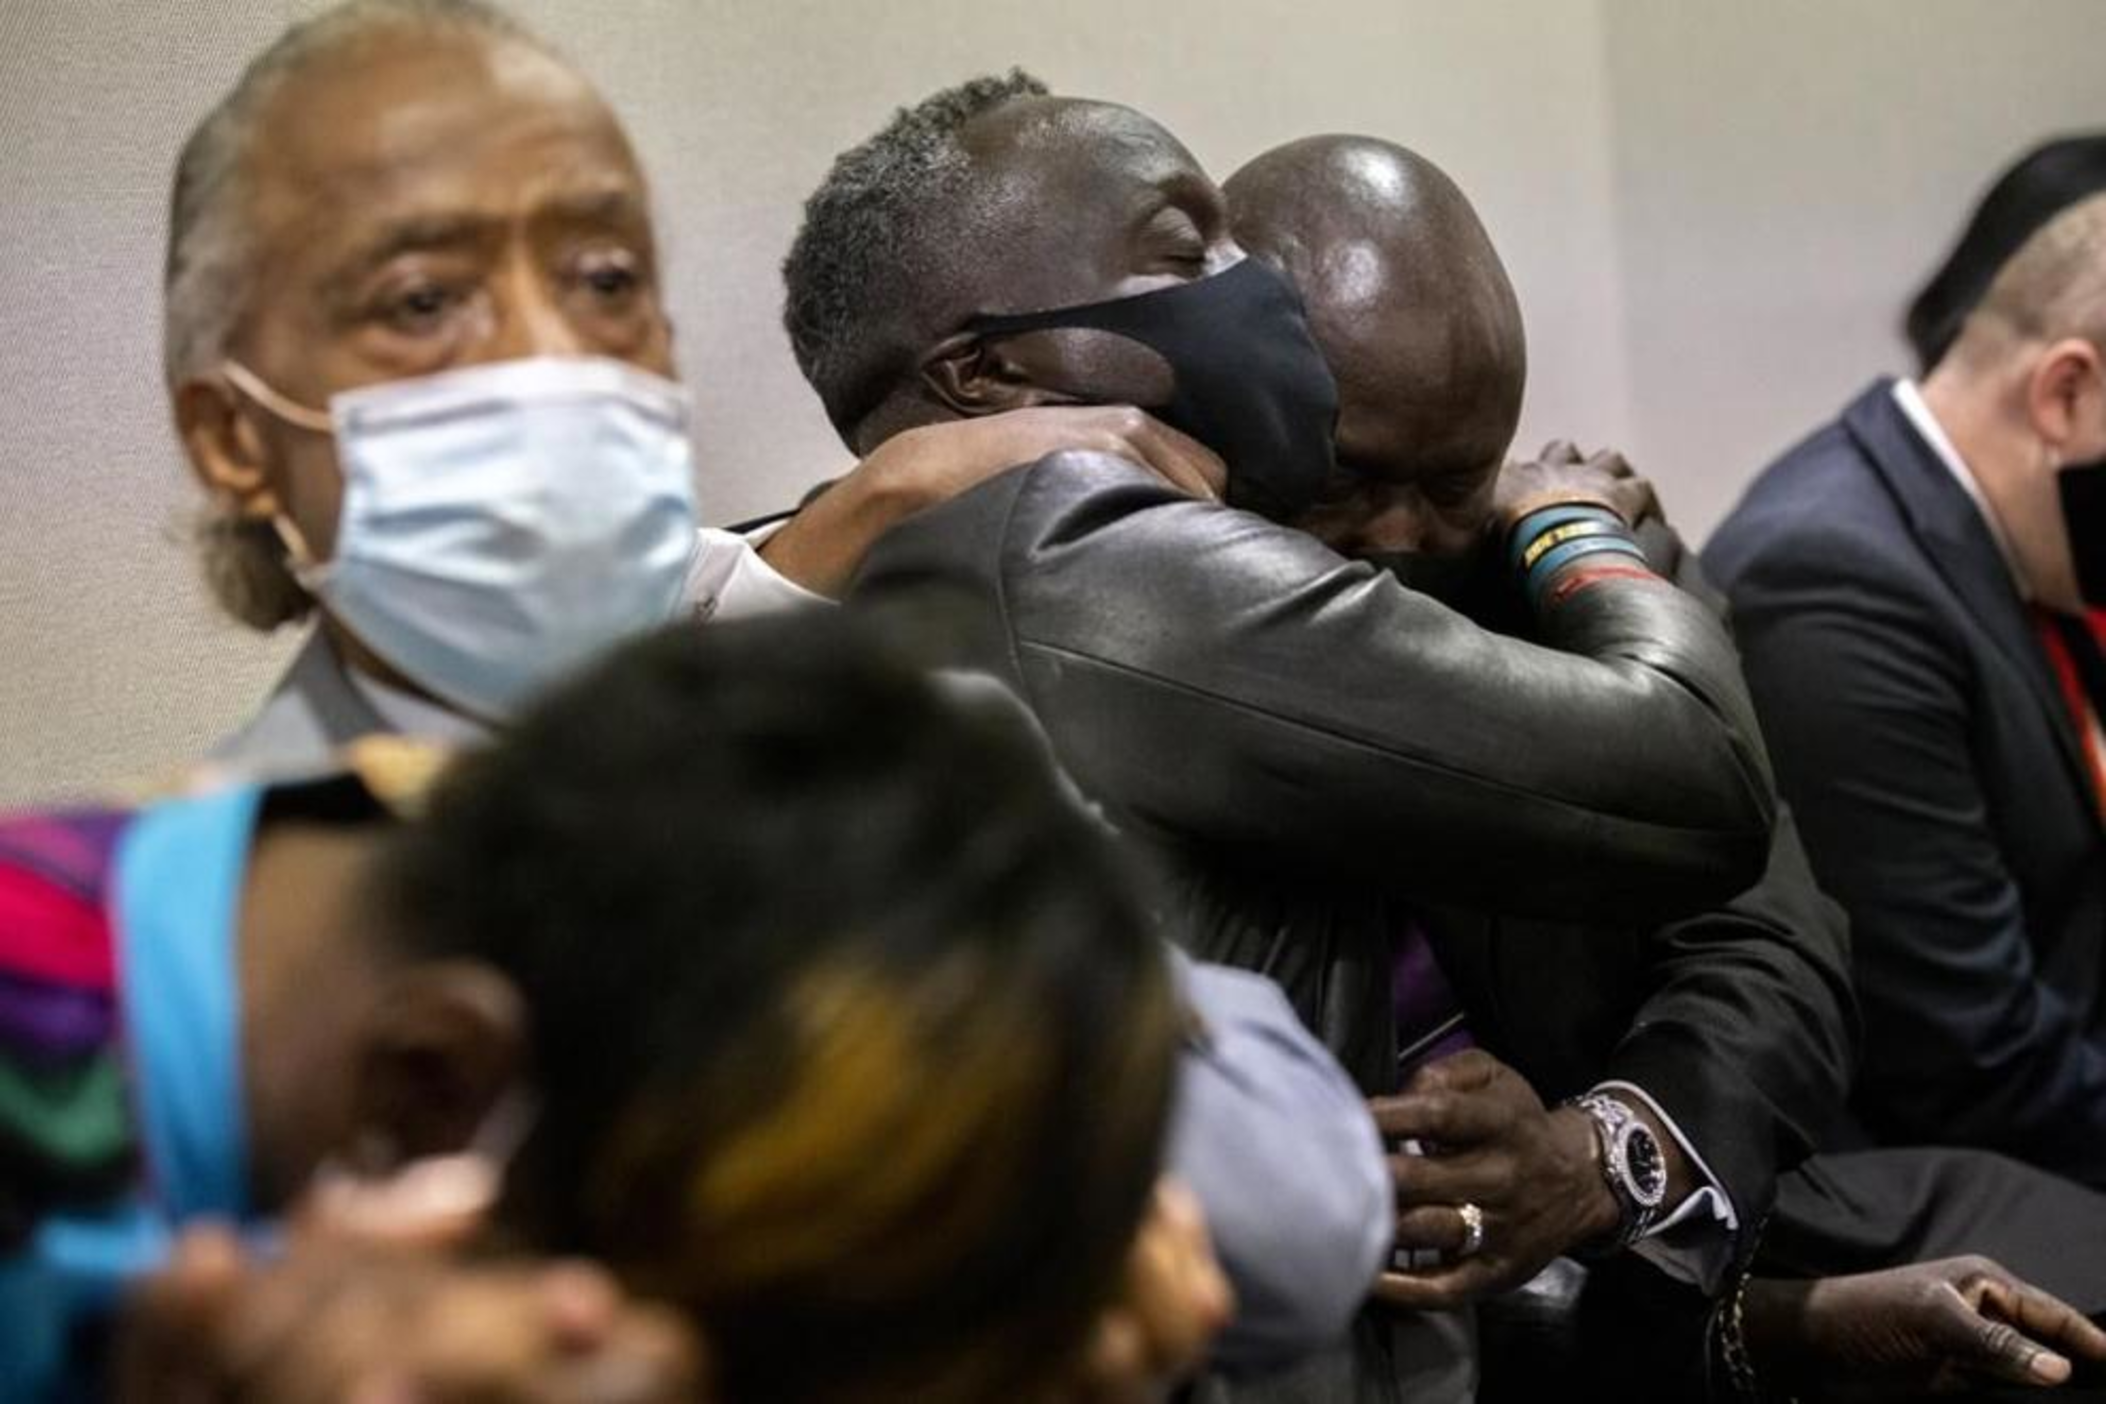 Ahmaud Arbery's father Marcus Arbery, center, is hugged by his attorney Benjamin Crump after the jury convicted Travis McMichael in the Glynn County Courthouse, Wednesday, Nov. 24, 2021, in Brunswick, Ga. Greg McMichael and his son, Travis McMichael, and a neighbor, William "Roddie" Bryan, charged in the death of Ahmaud Arbery were convicted of murder Wednesday in the fatal shooting that became part of a larger national reckoning on racial injustice.